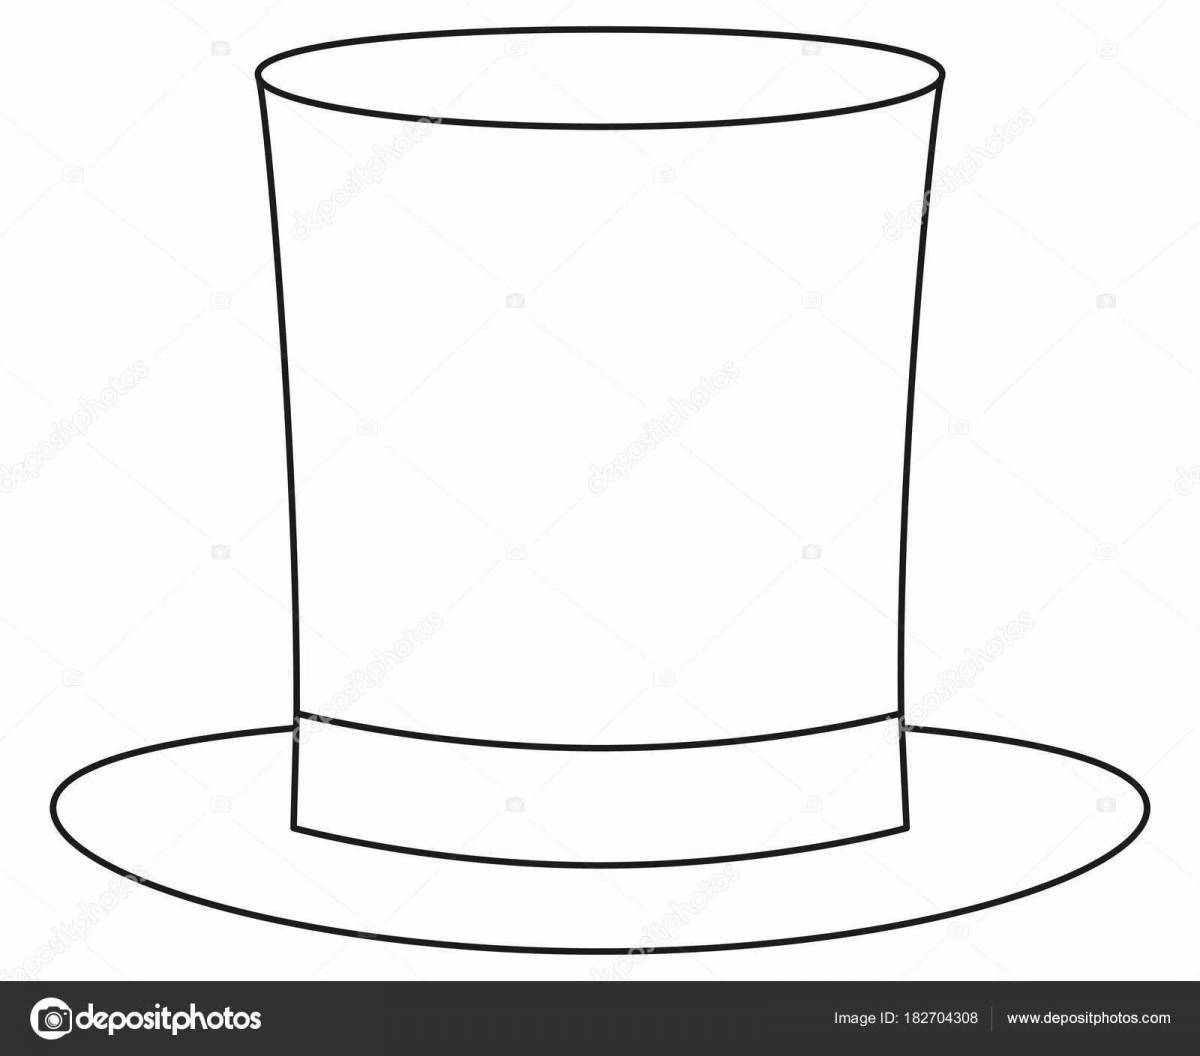 Sweet cylinder hat coloring book